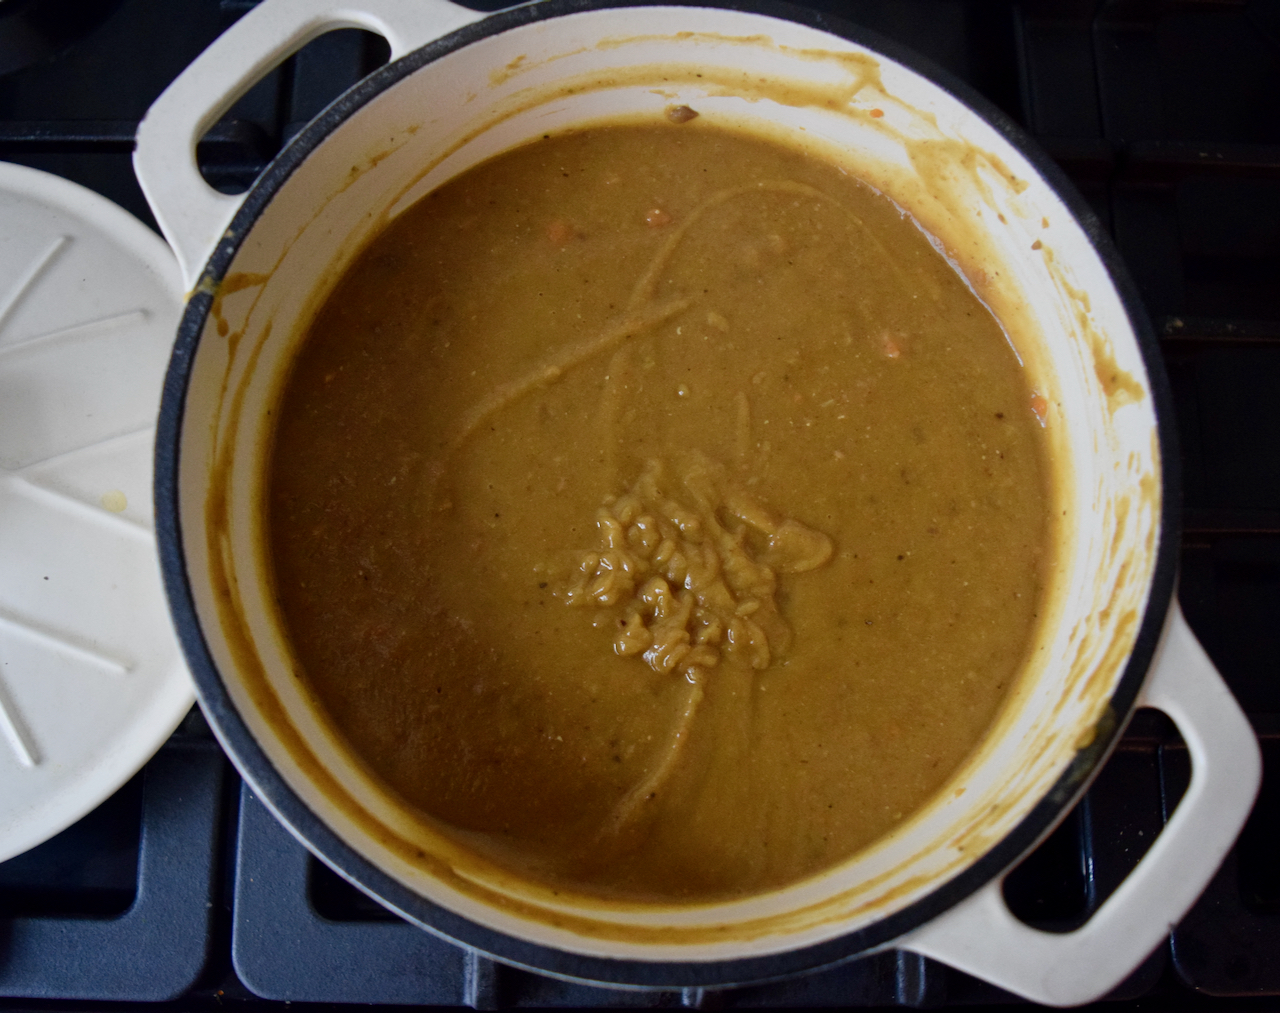 Lentil and Chestnut Soup from Lucy Loves Food Blog